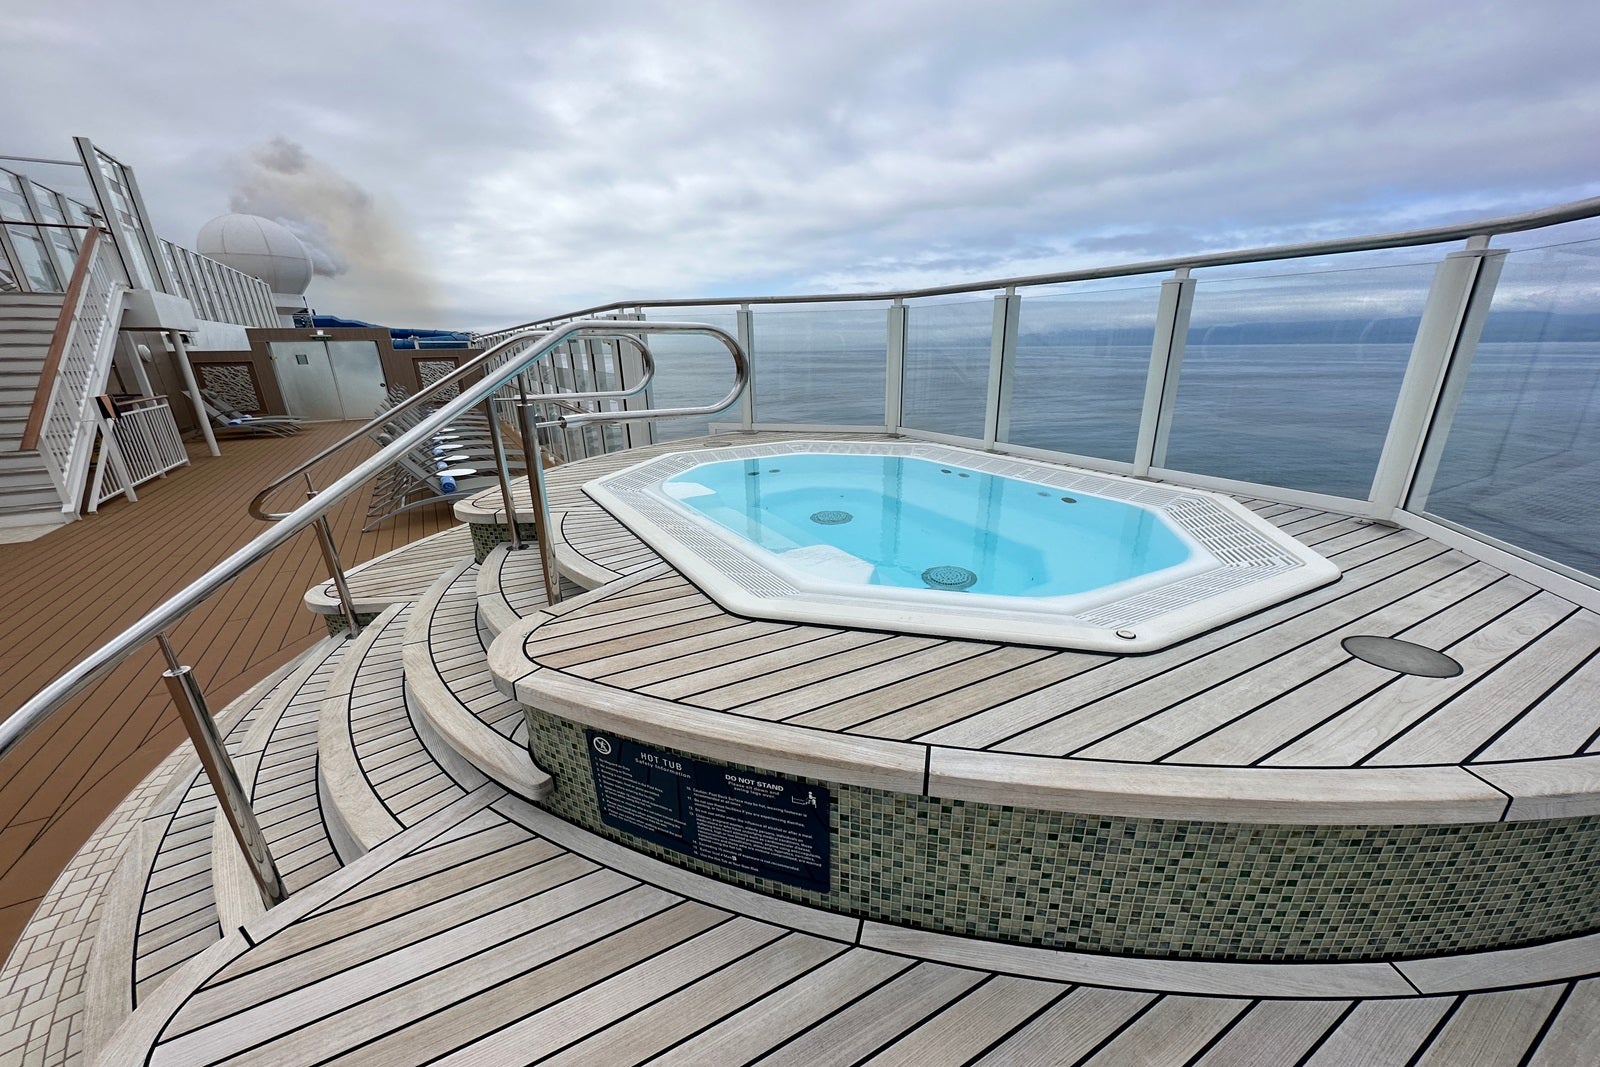 A cruise ship hot tub and railings raised on tiered decking and overlooking the ocean